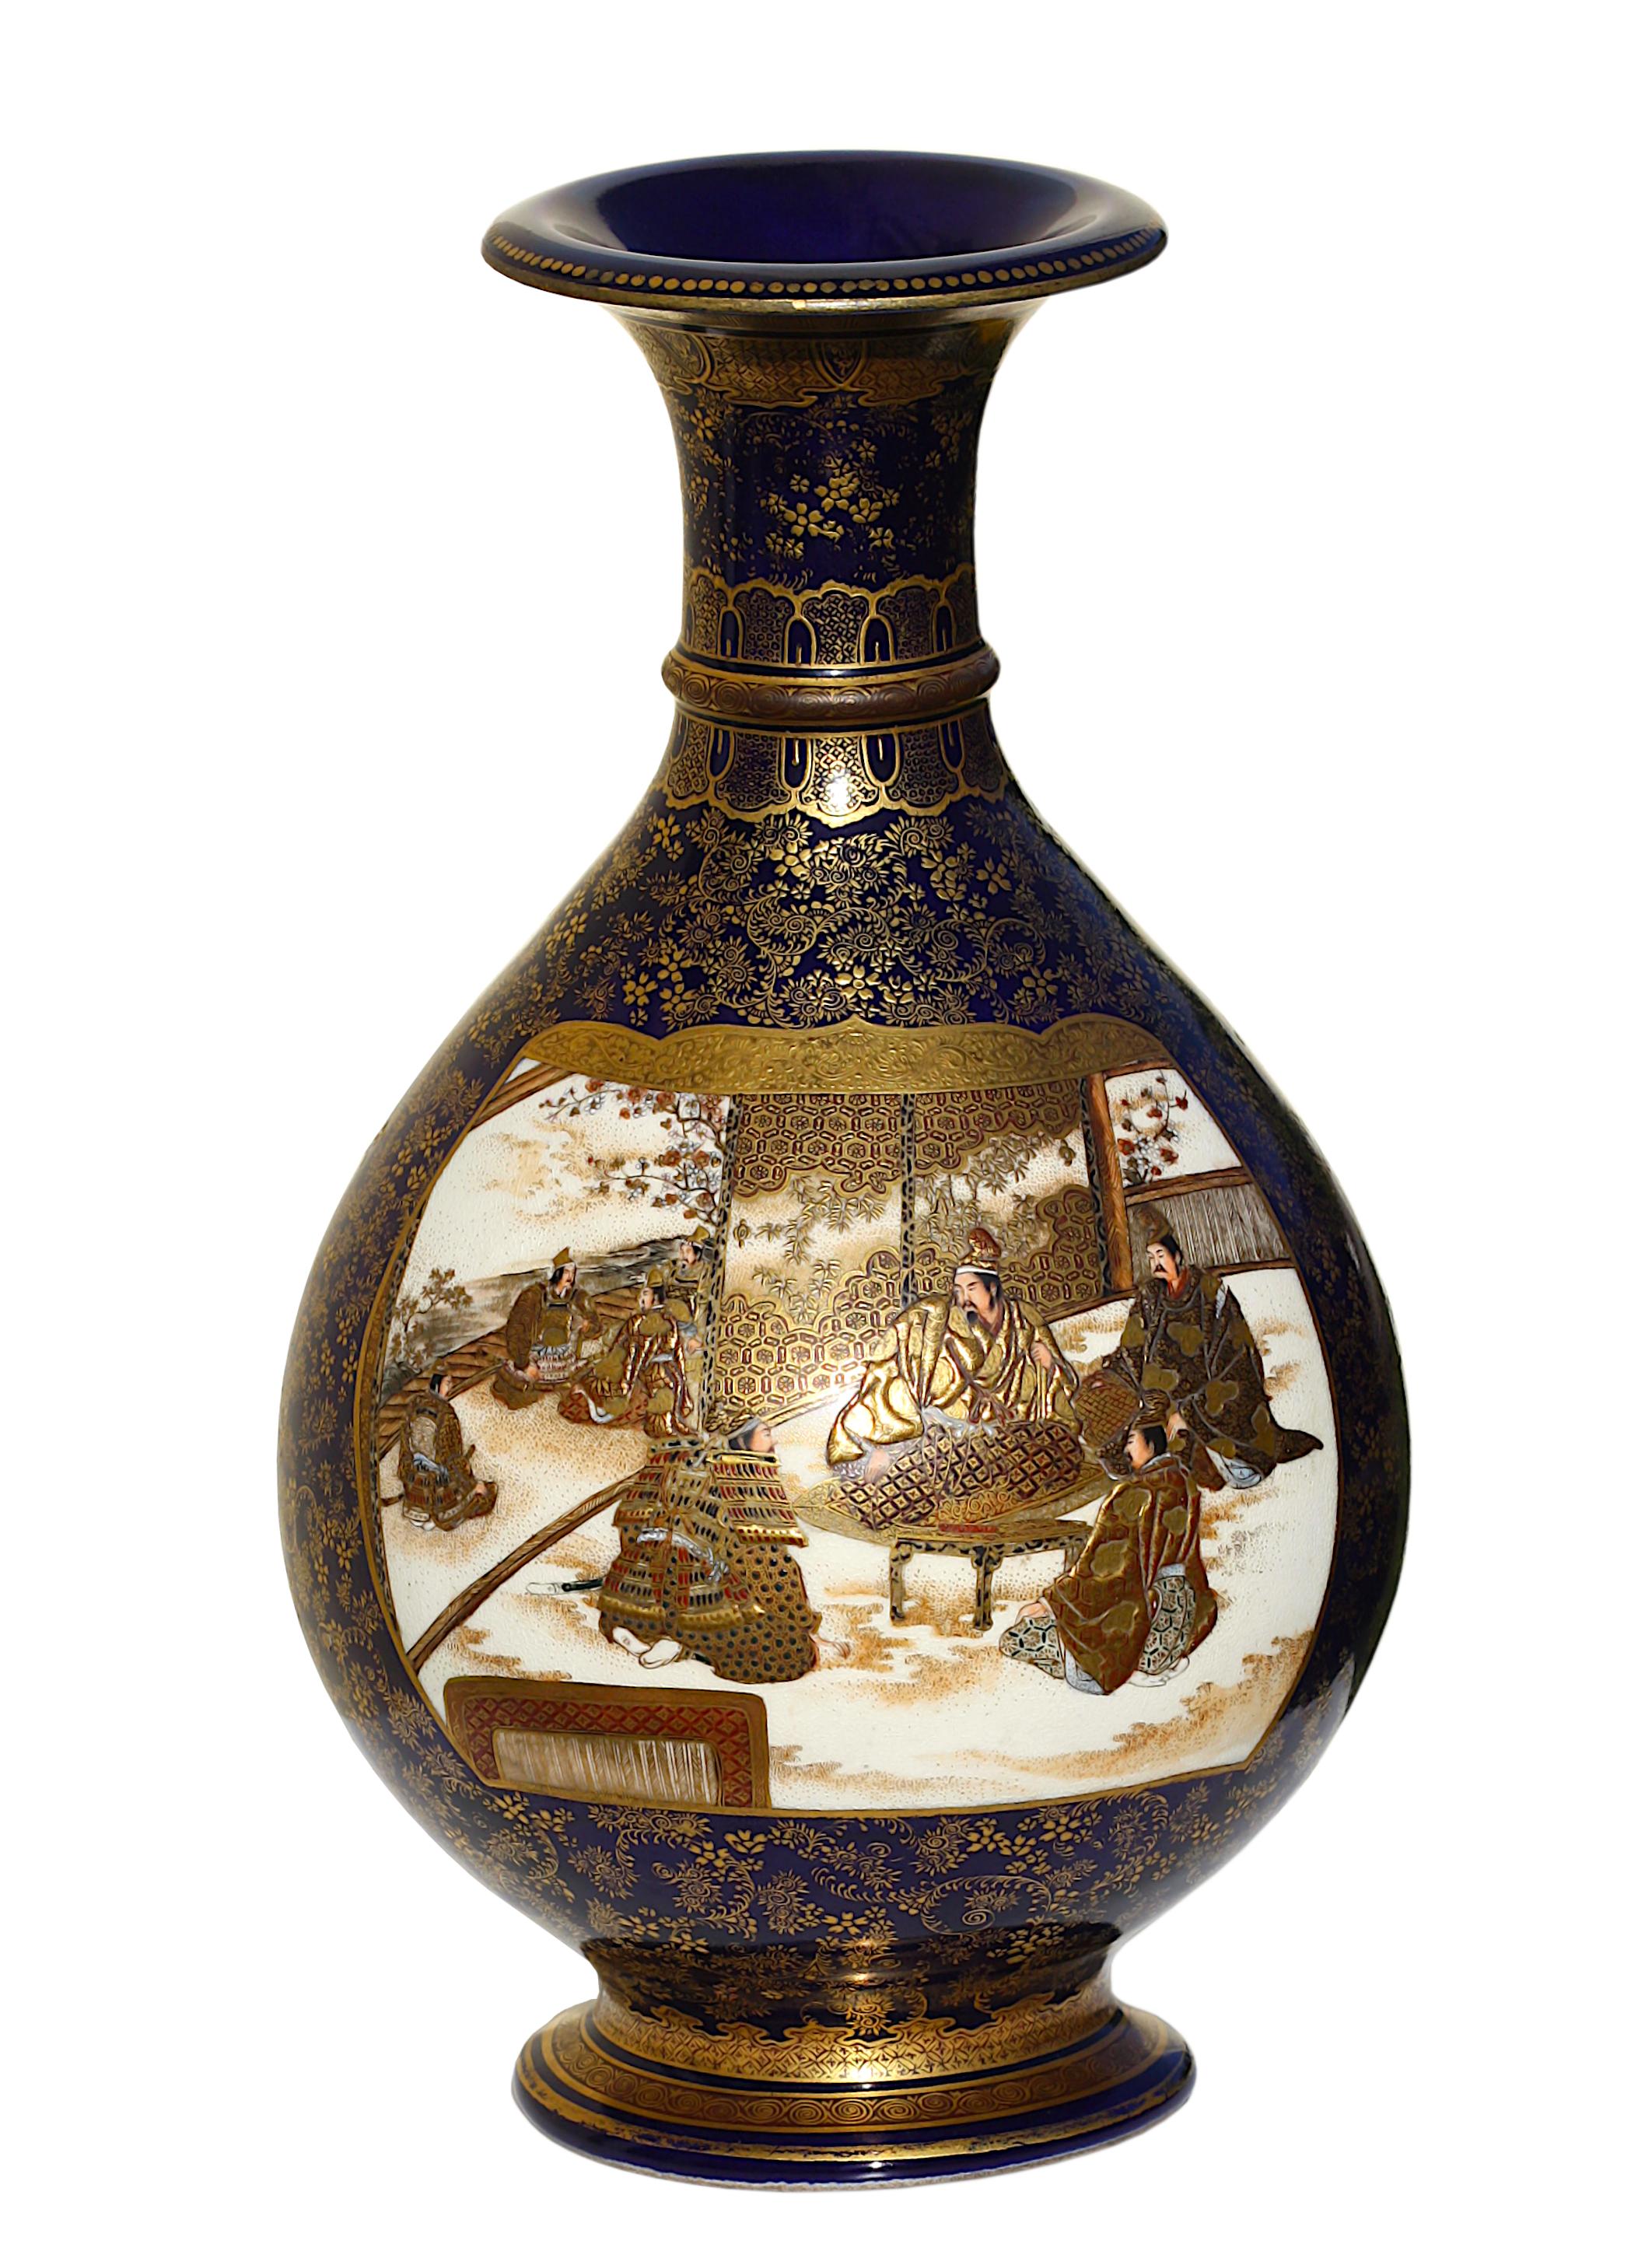 A Japanese Satsuma Earthenware Vase by Kinkozan, Meiji period (1868-1912)
The body inset with two panels, one depicting figures seated around a table, the other painted with a joyful scene in a shrine, all reserved on a blue ground decorated with a